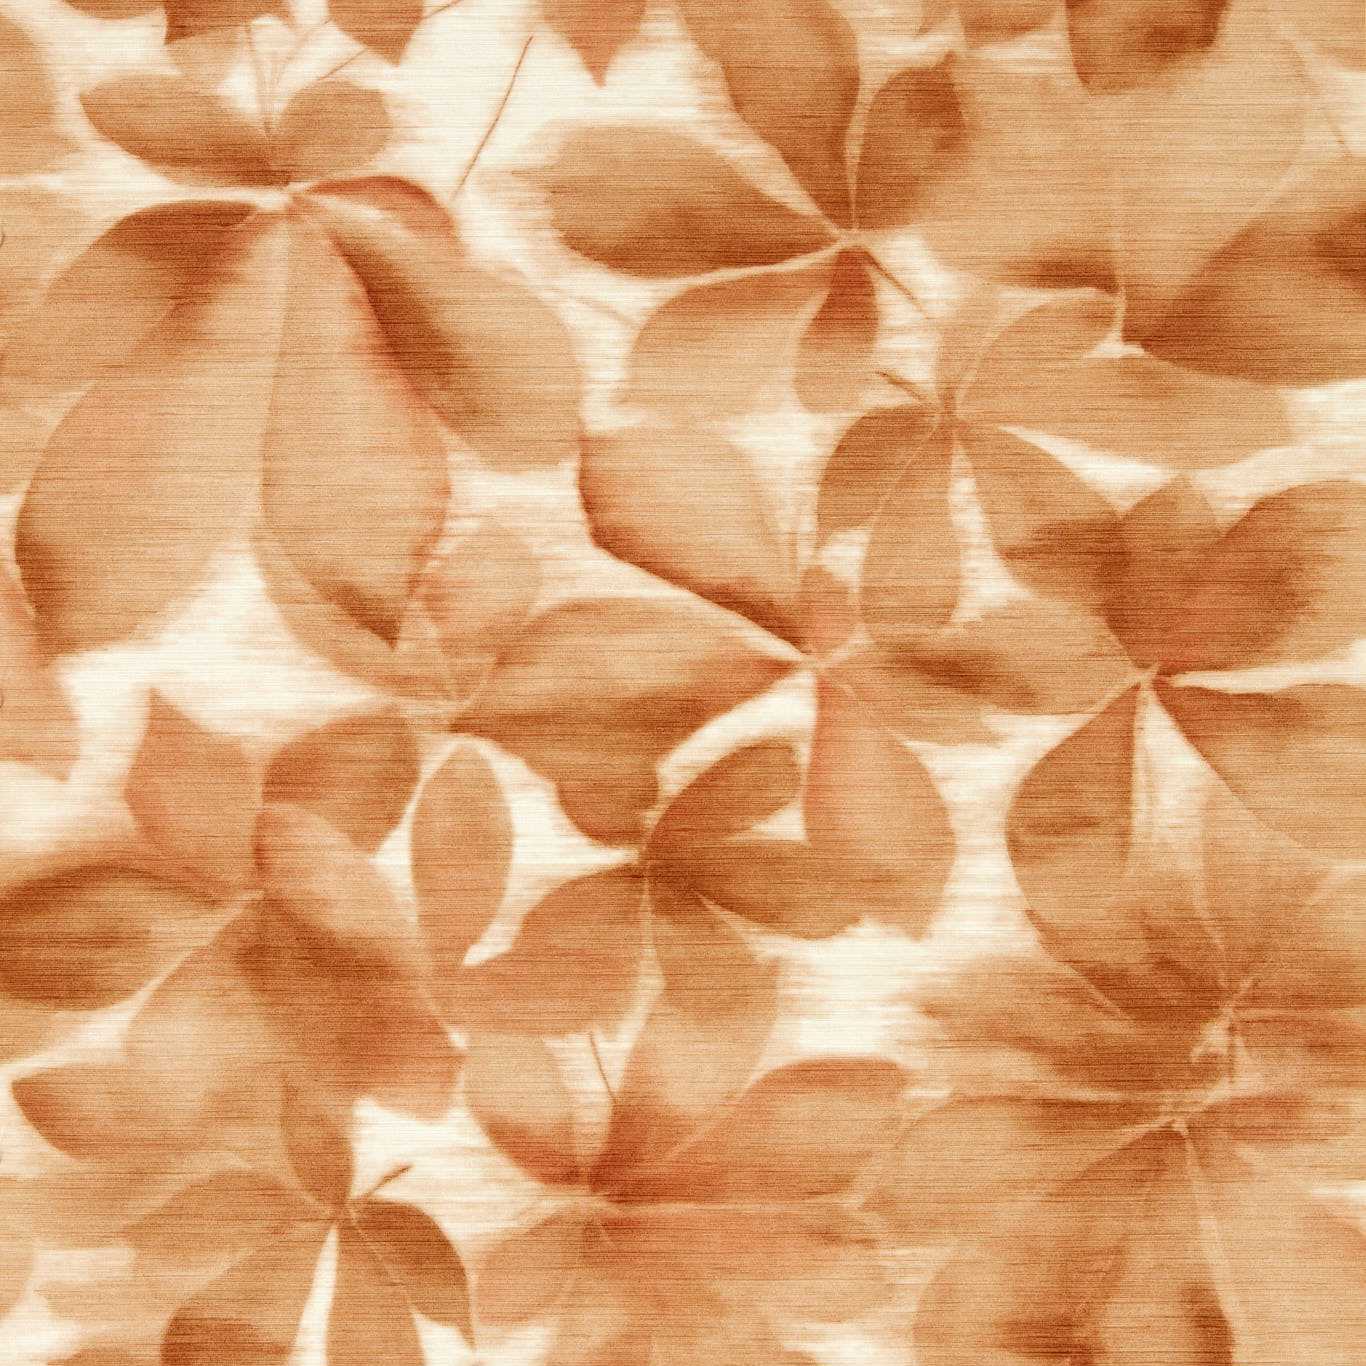 Grounded Baked Terracotta/Parchment Wallpaper HC4W113007 by Harlequin